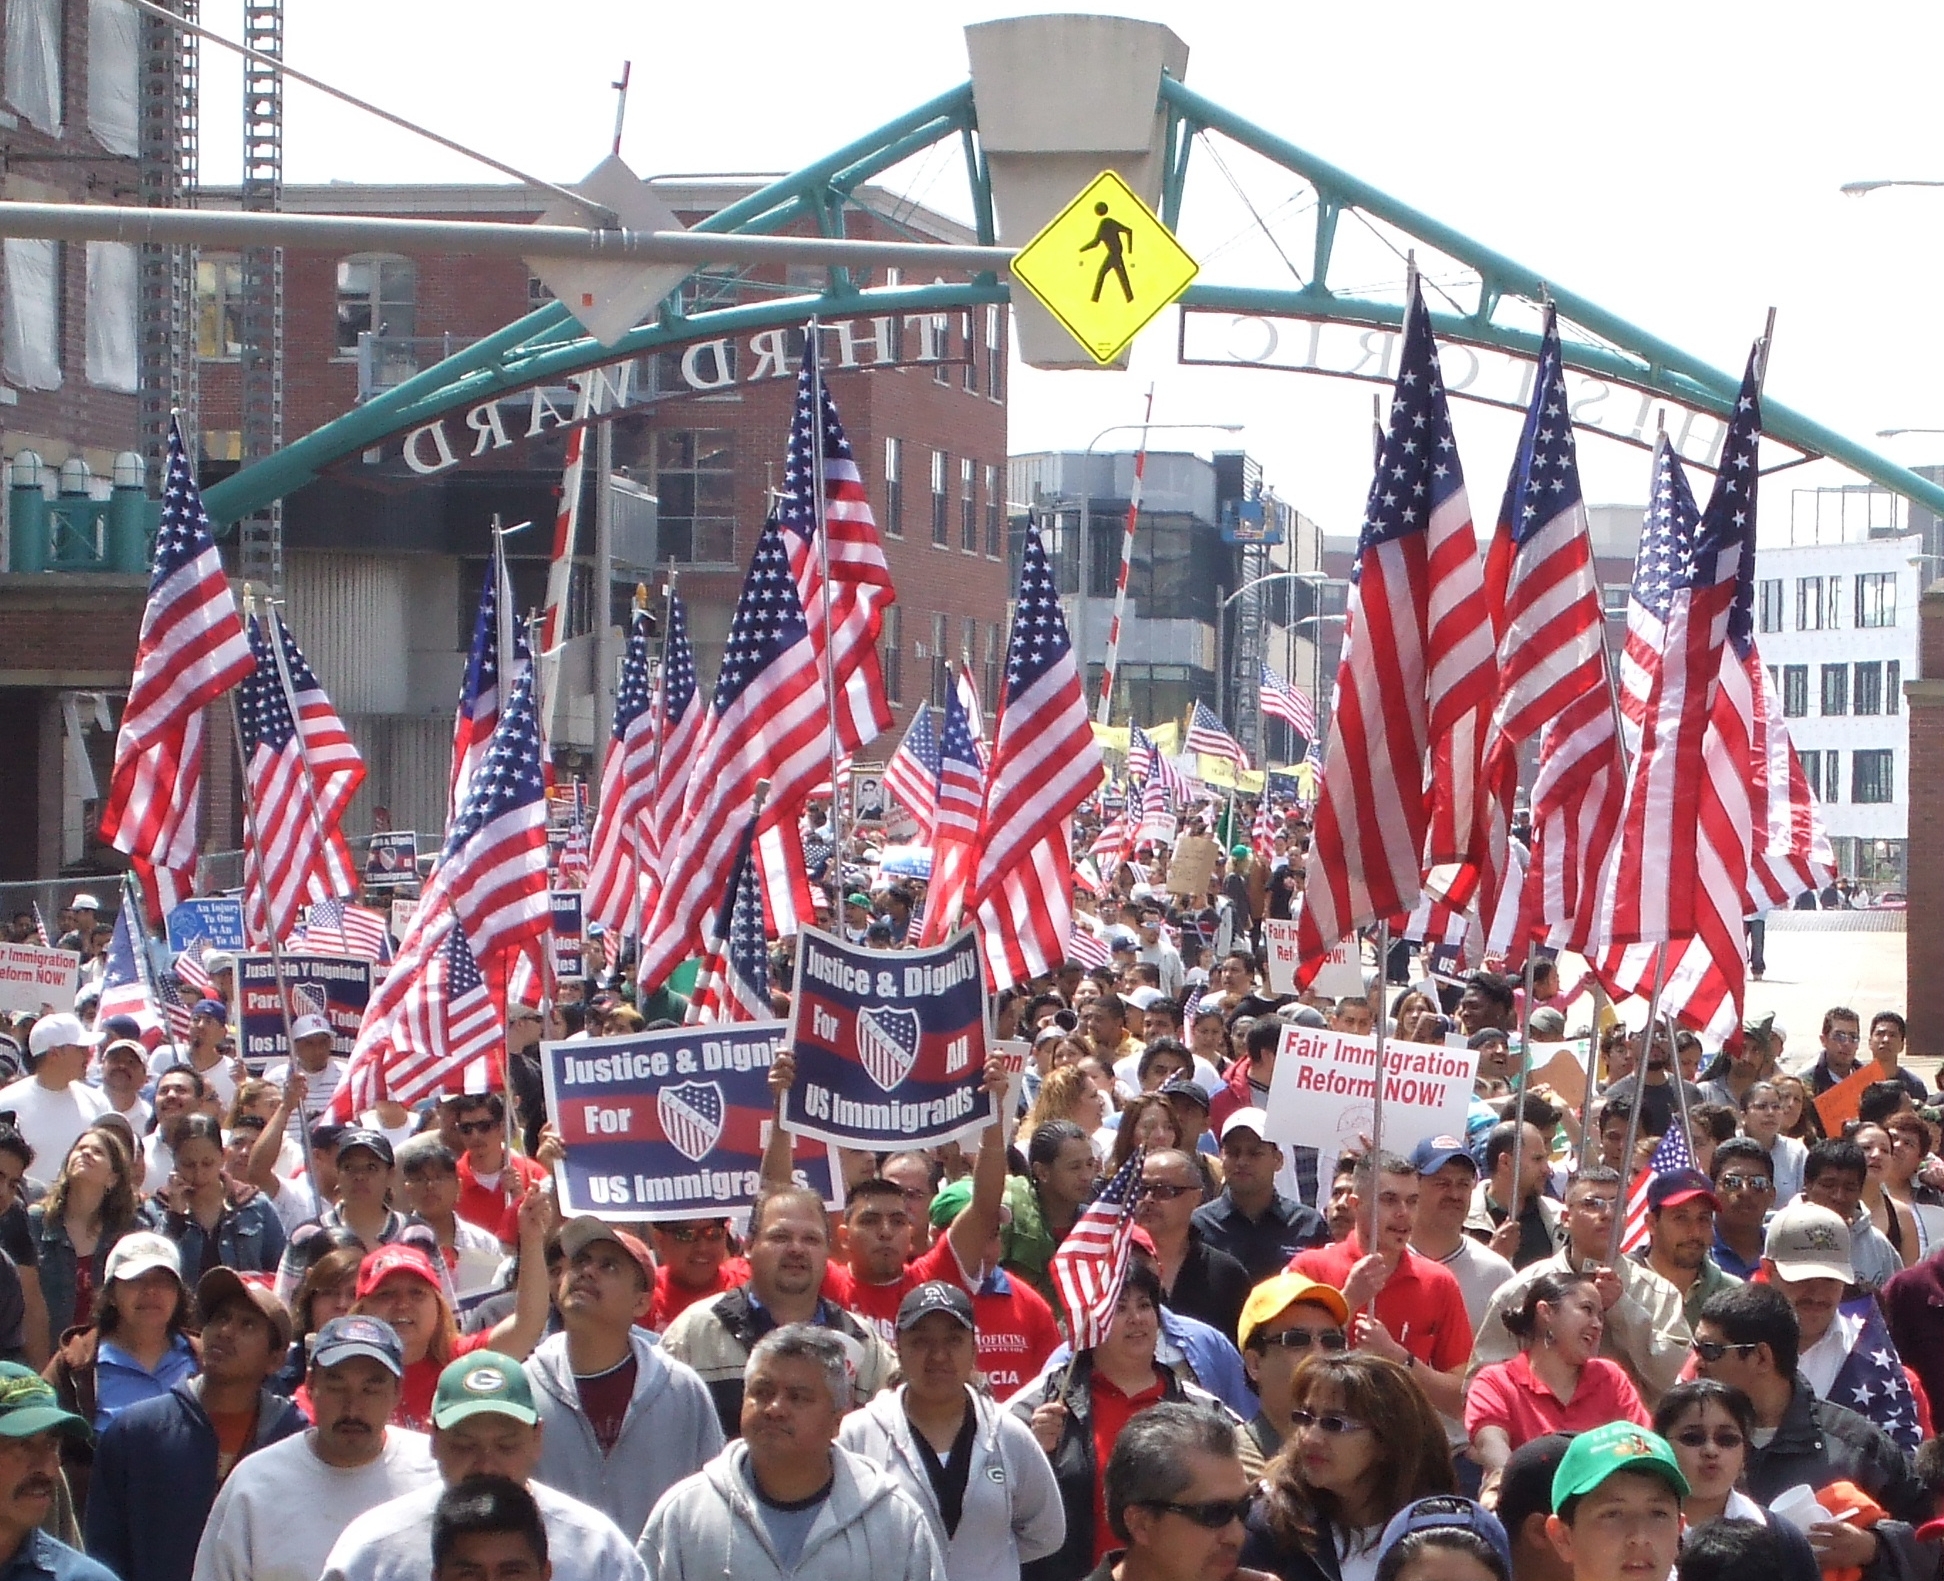 a group of people walking with signs and american flags